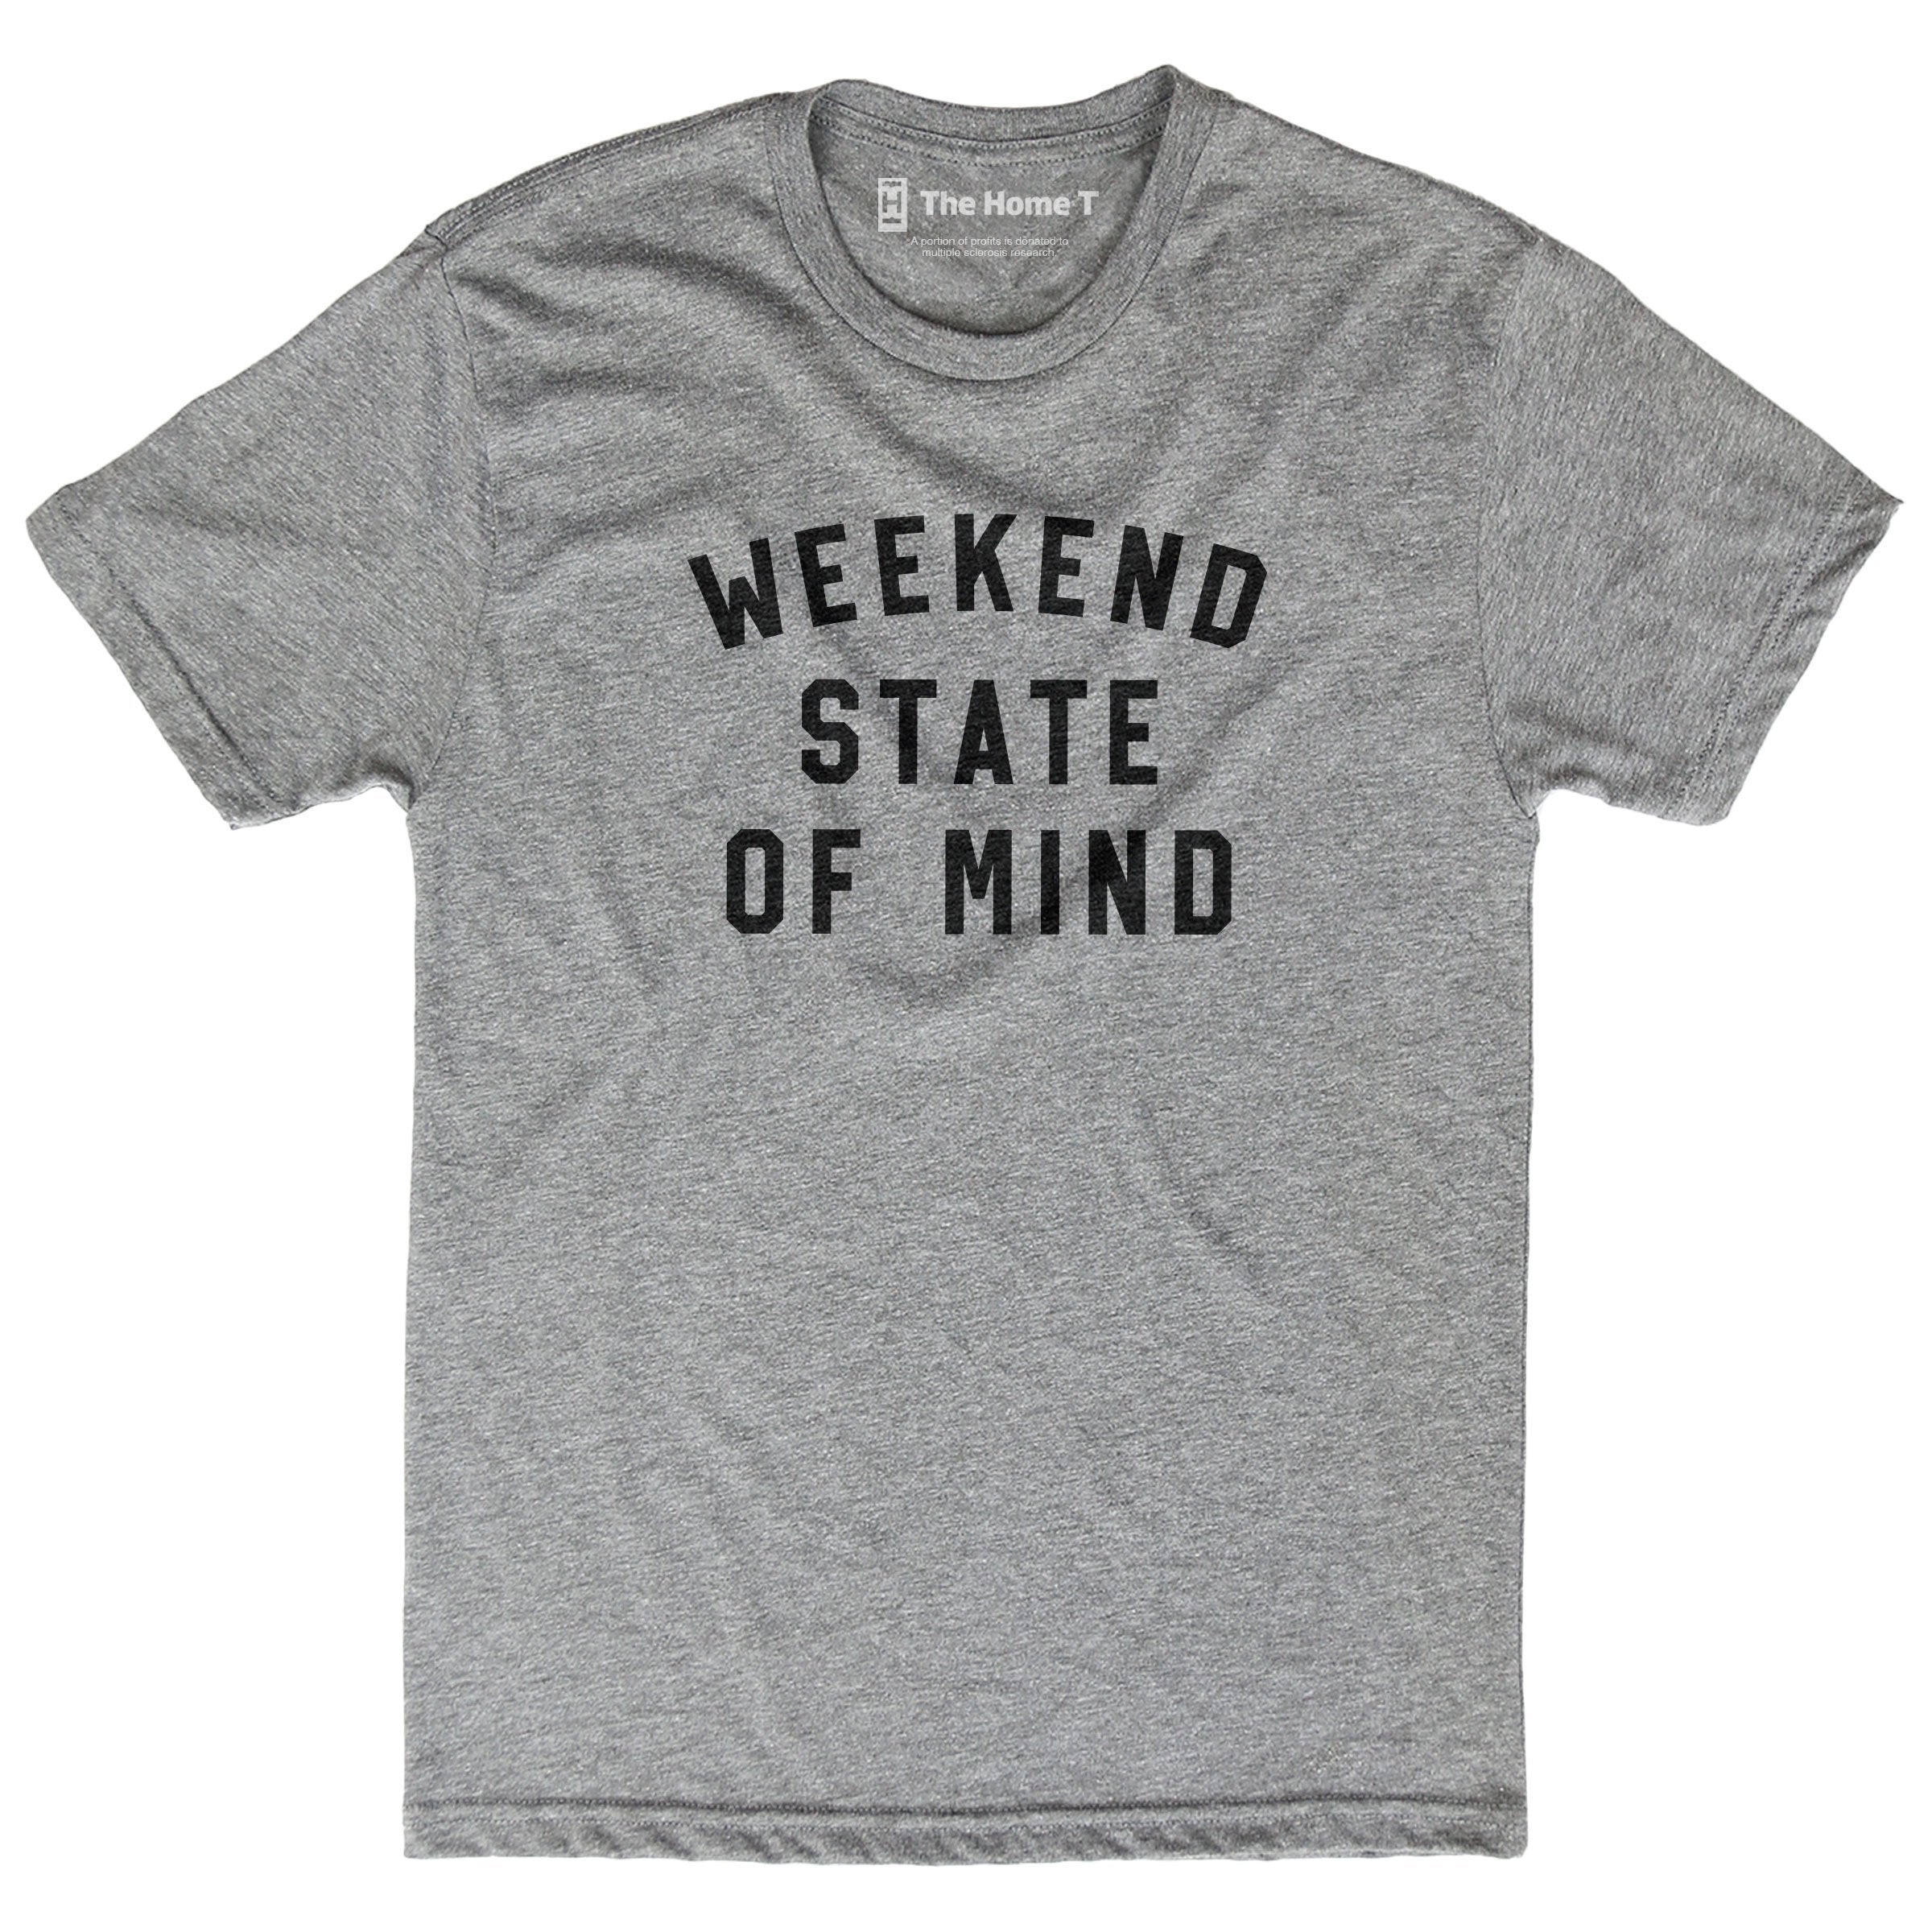 The Weekend Crew neck The Home T XS Crewneck